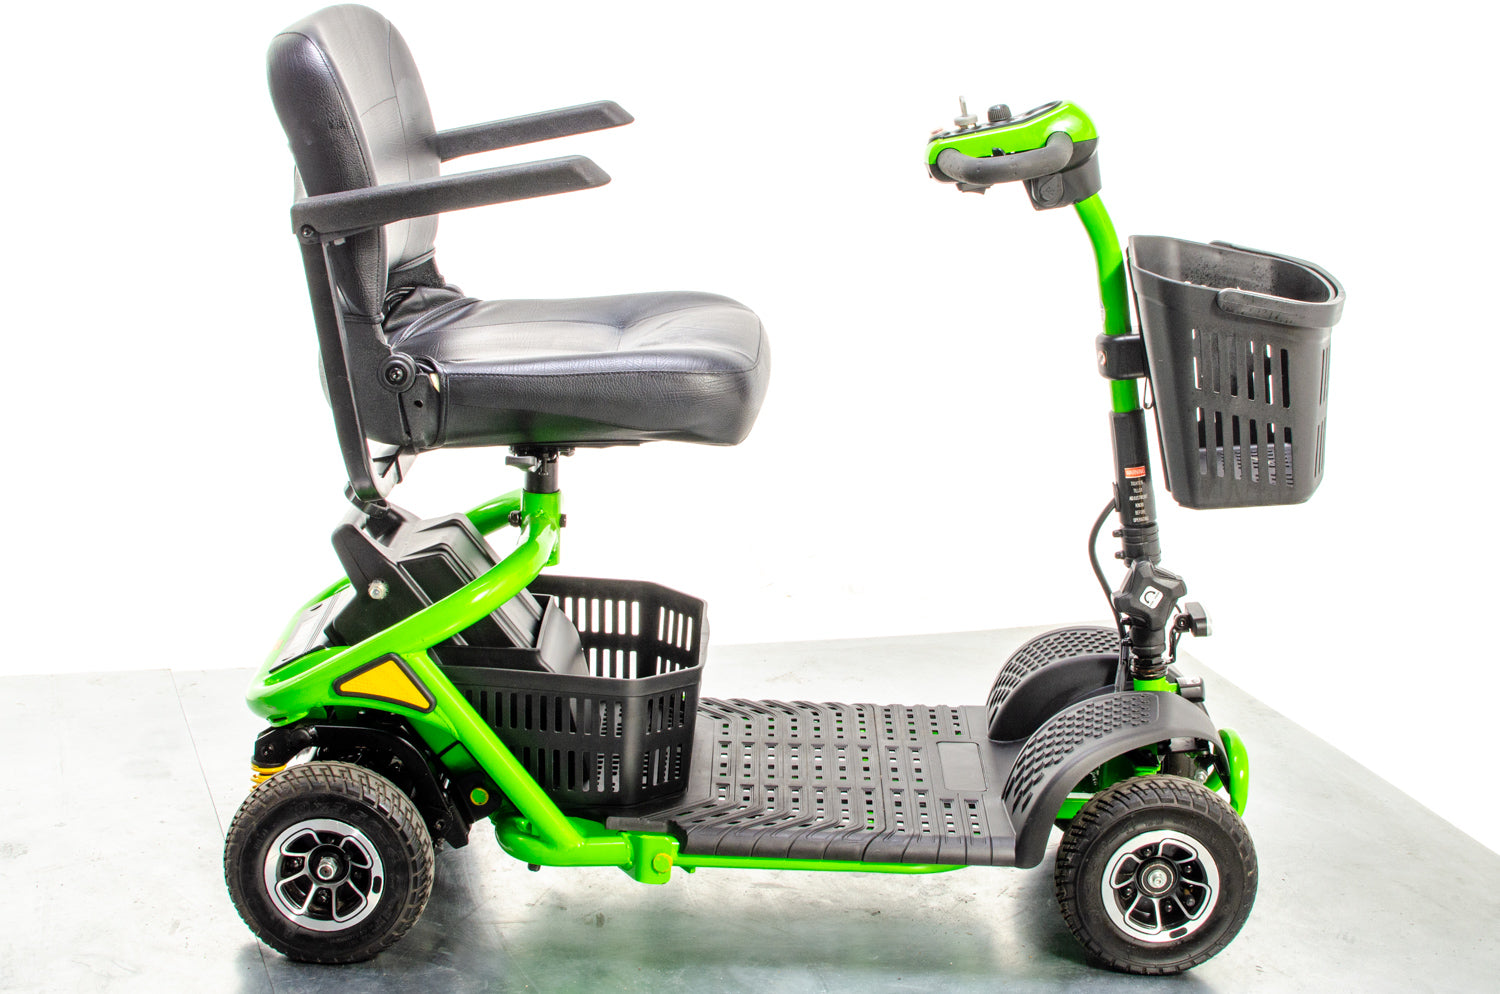 2021 Monarch Mini 4 Used Mobility Scooter Small Transportable Pneumatic Tyres Parks Green